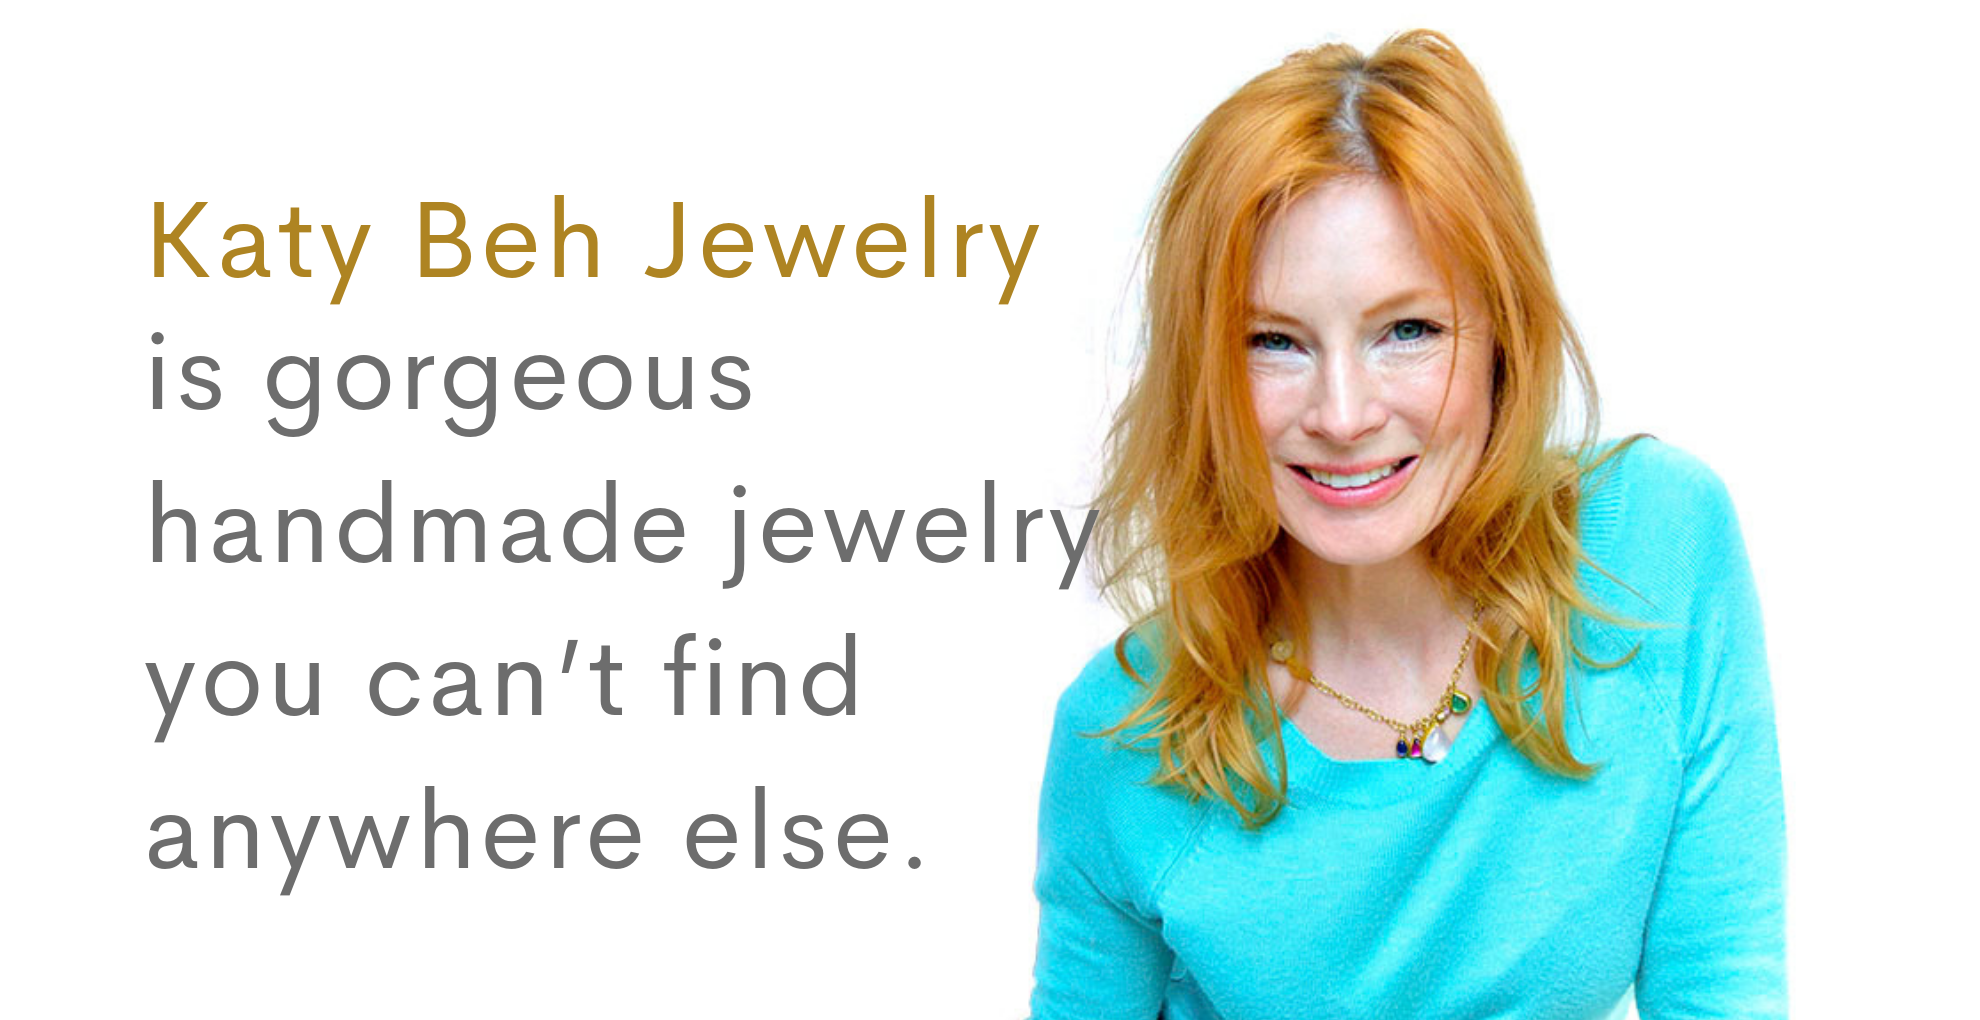 Katy Beh Jewelry is gorgeous handmade jewelry you can't find anywhere else.